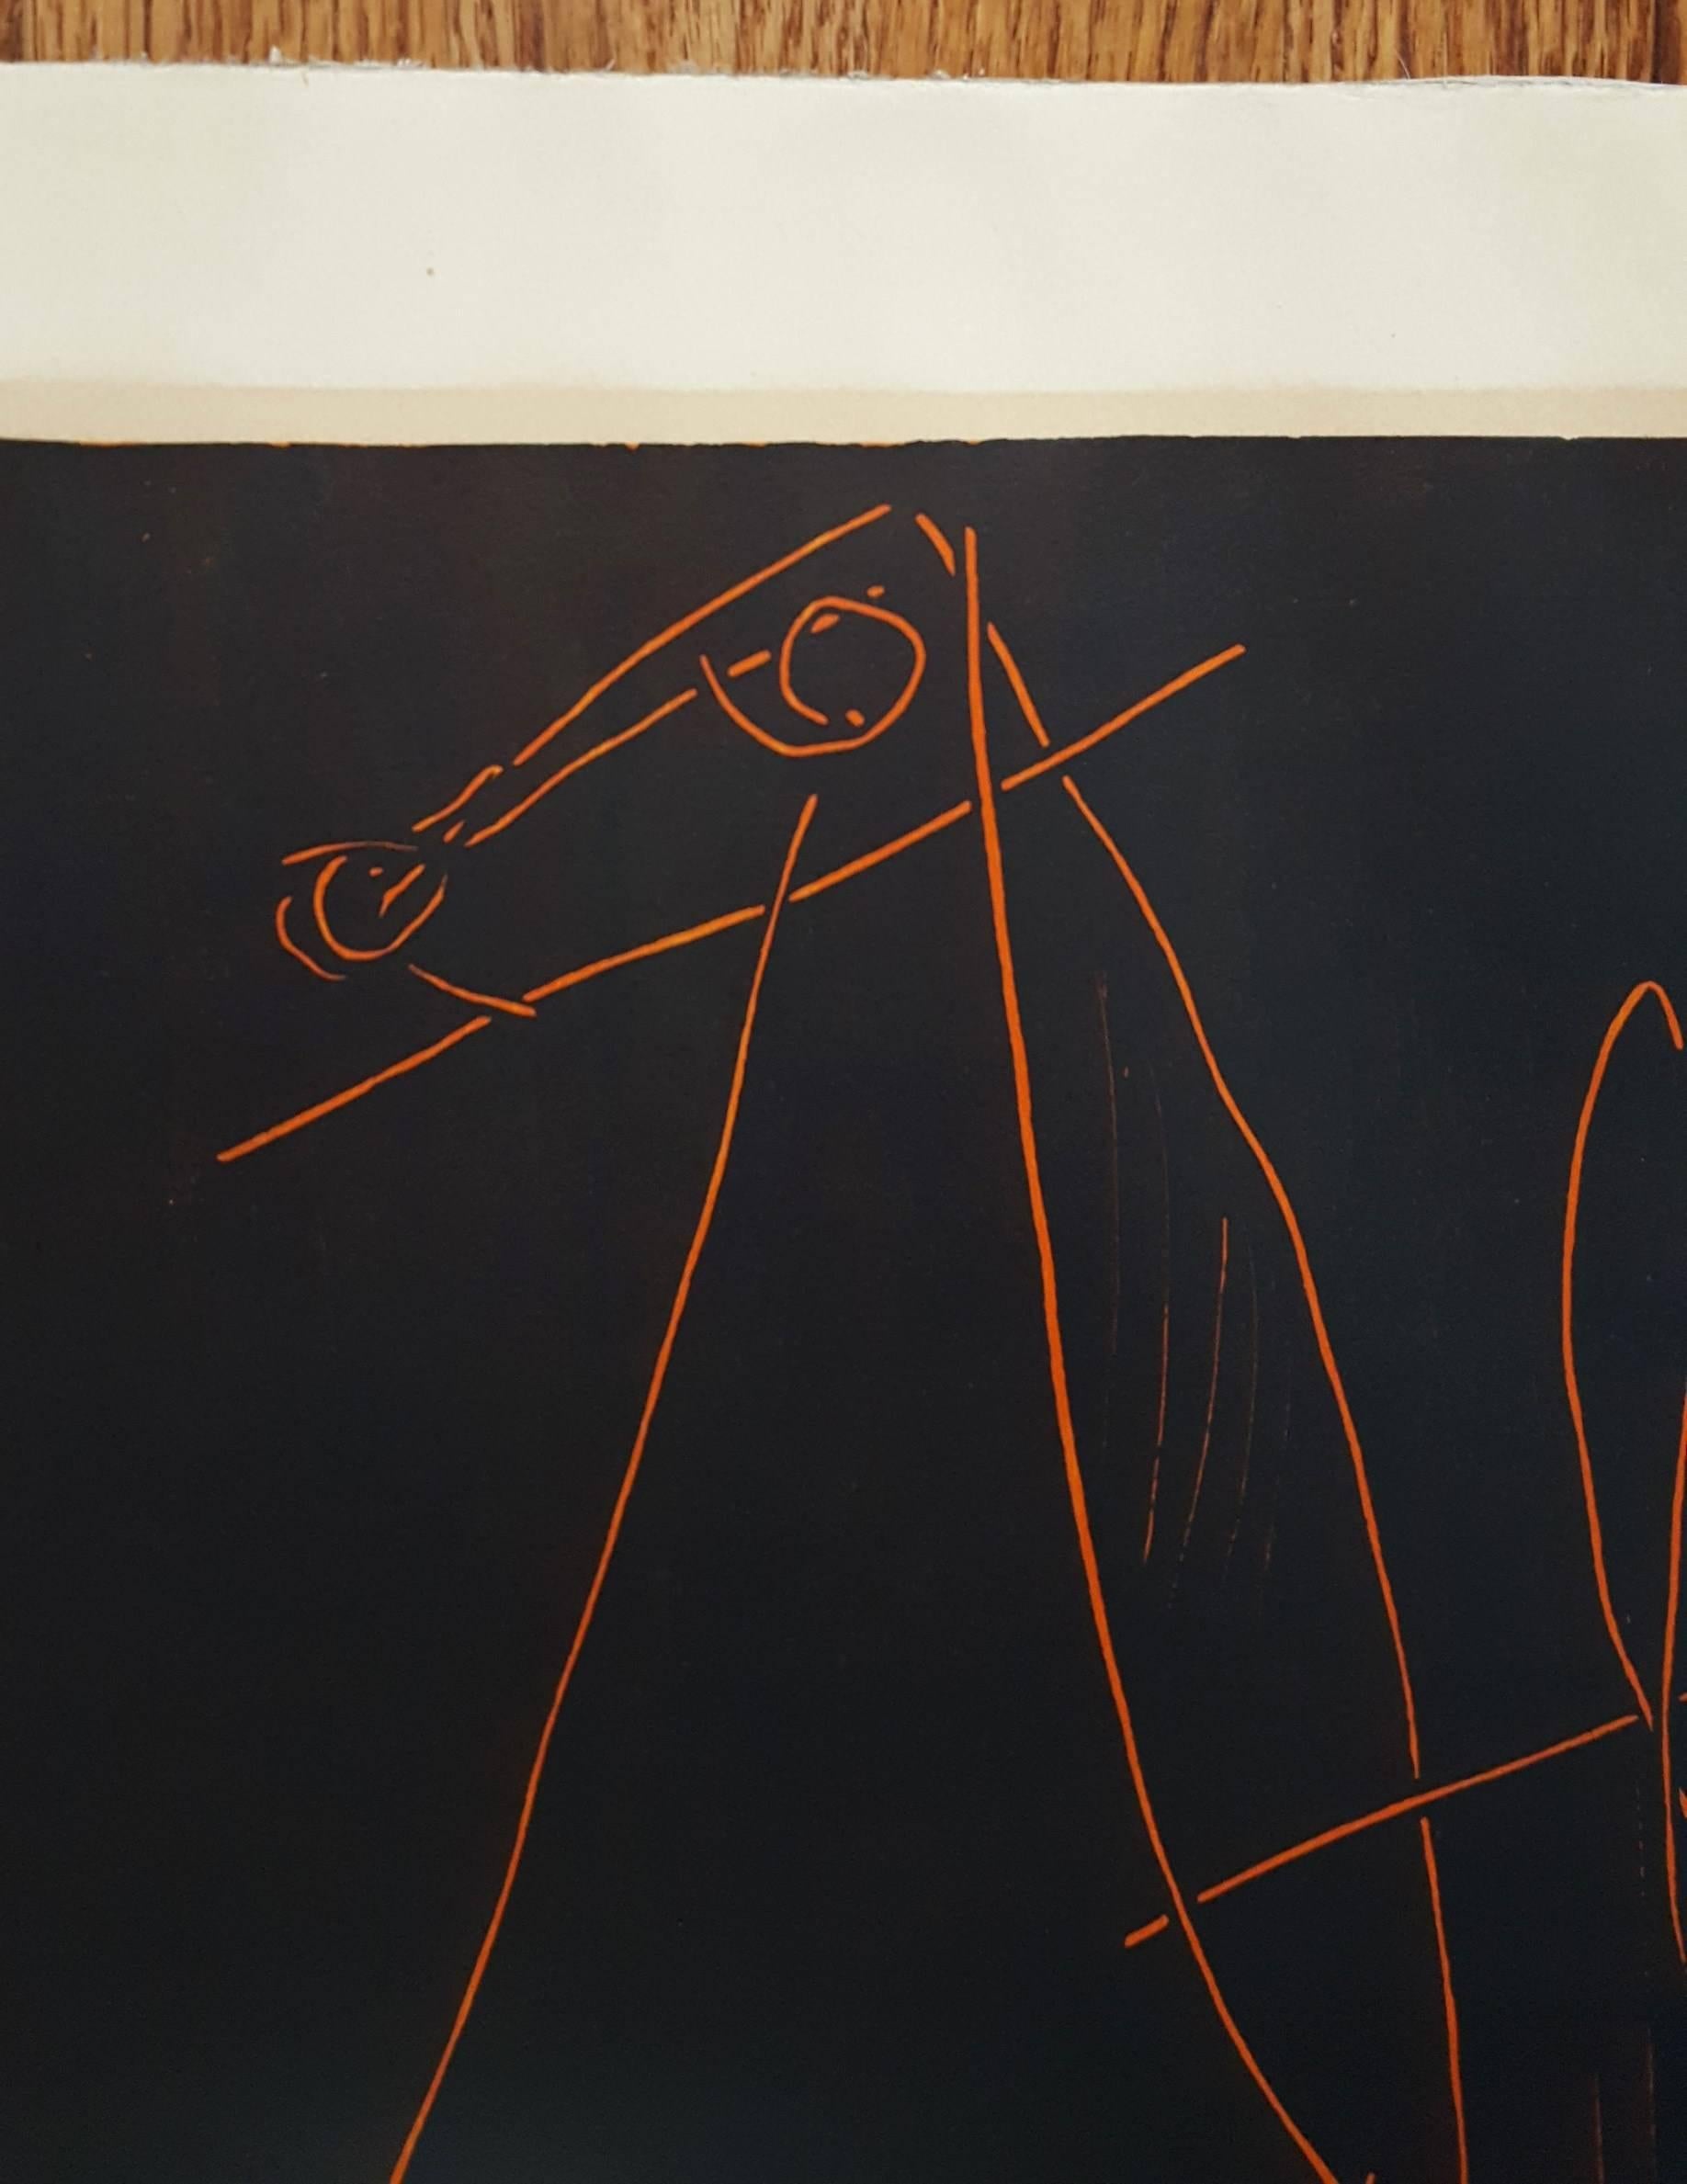 An original signed lithograph on wove paper by Italian artist Marino Marini (1901-1980) titled "Horse and Rider", c. 1950. Hand pencil signed by Marino lower right and numbered lower left. Limited edition: 73/200. Arches watermark right